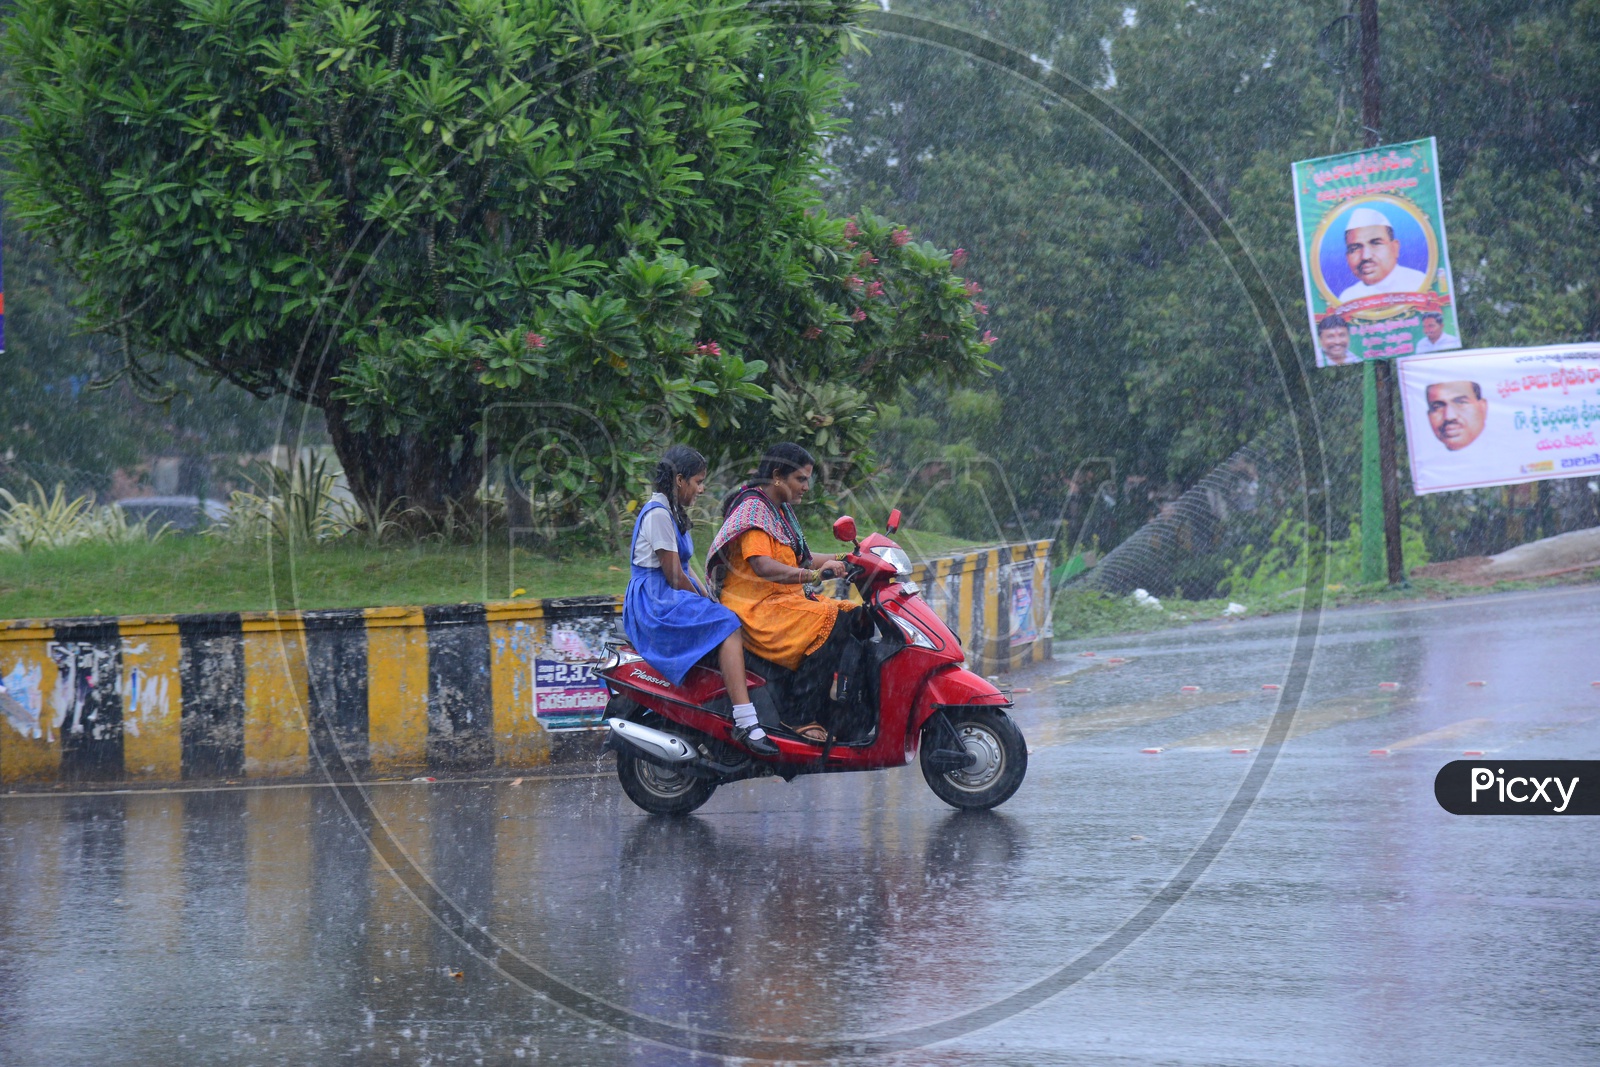 A woman riding a bike with girl behind on the road while its raining